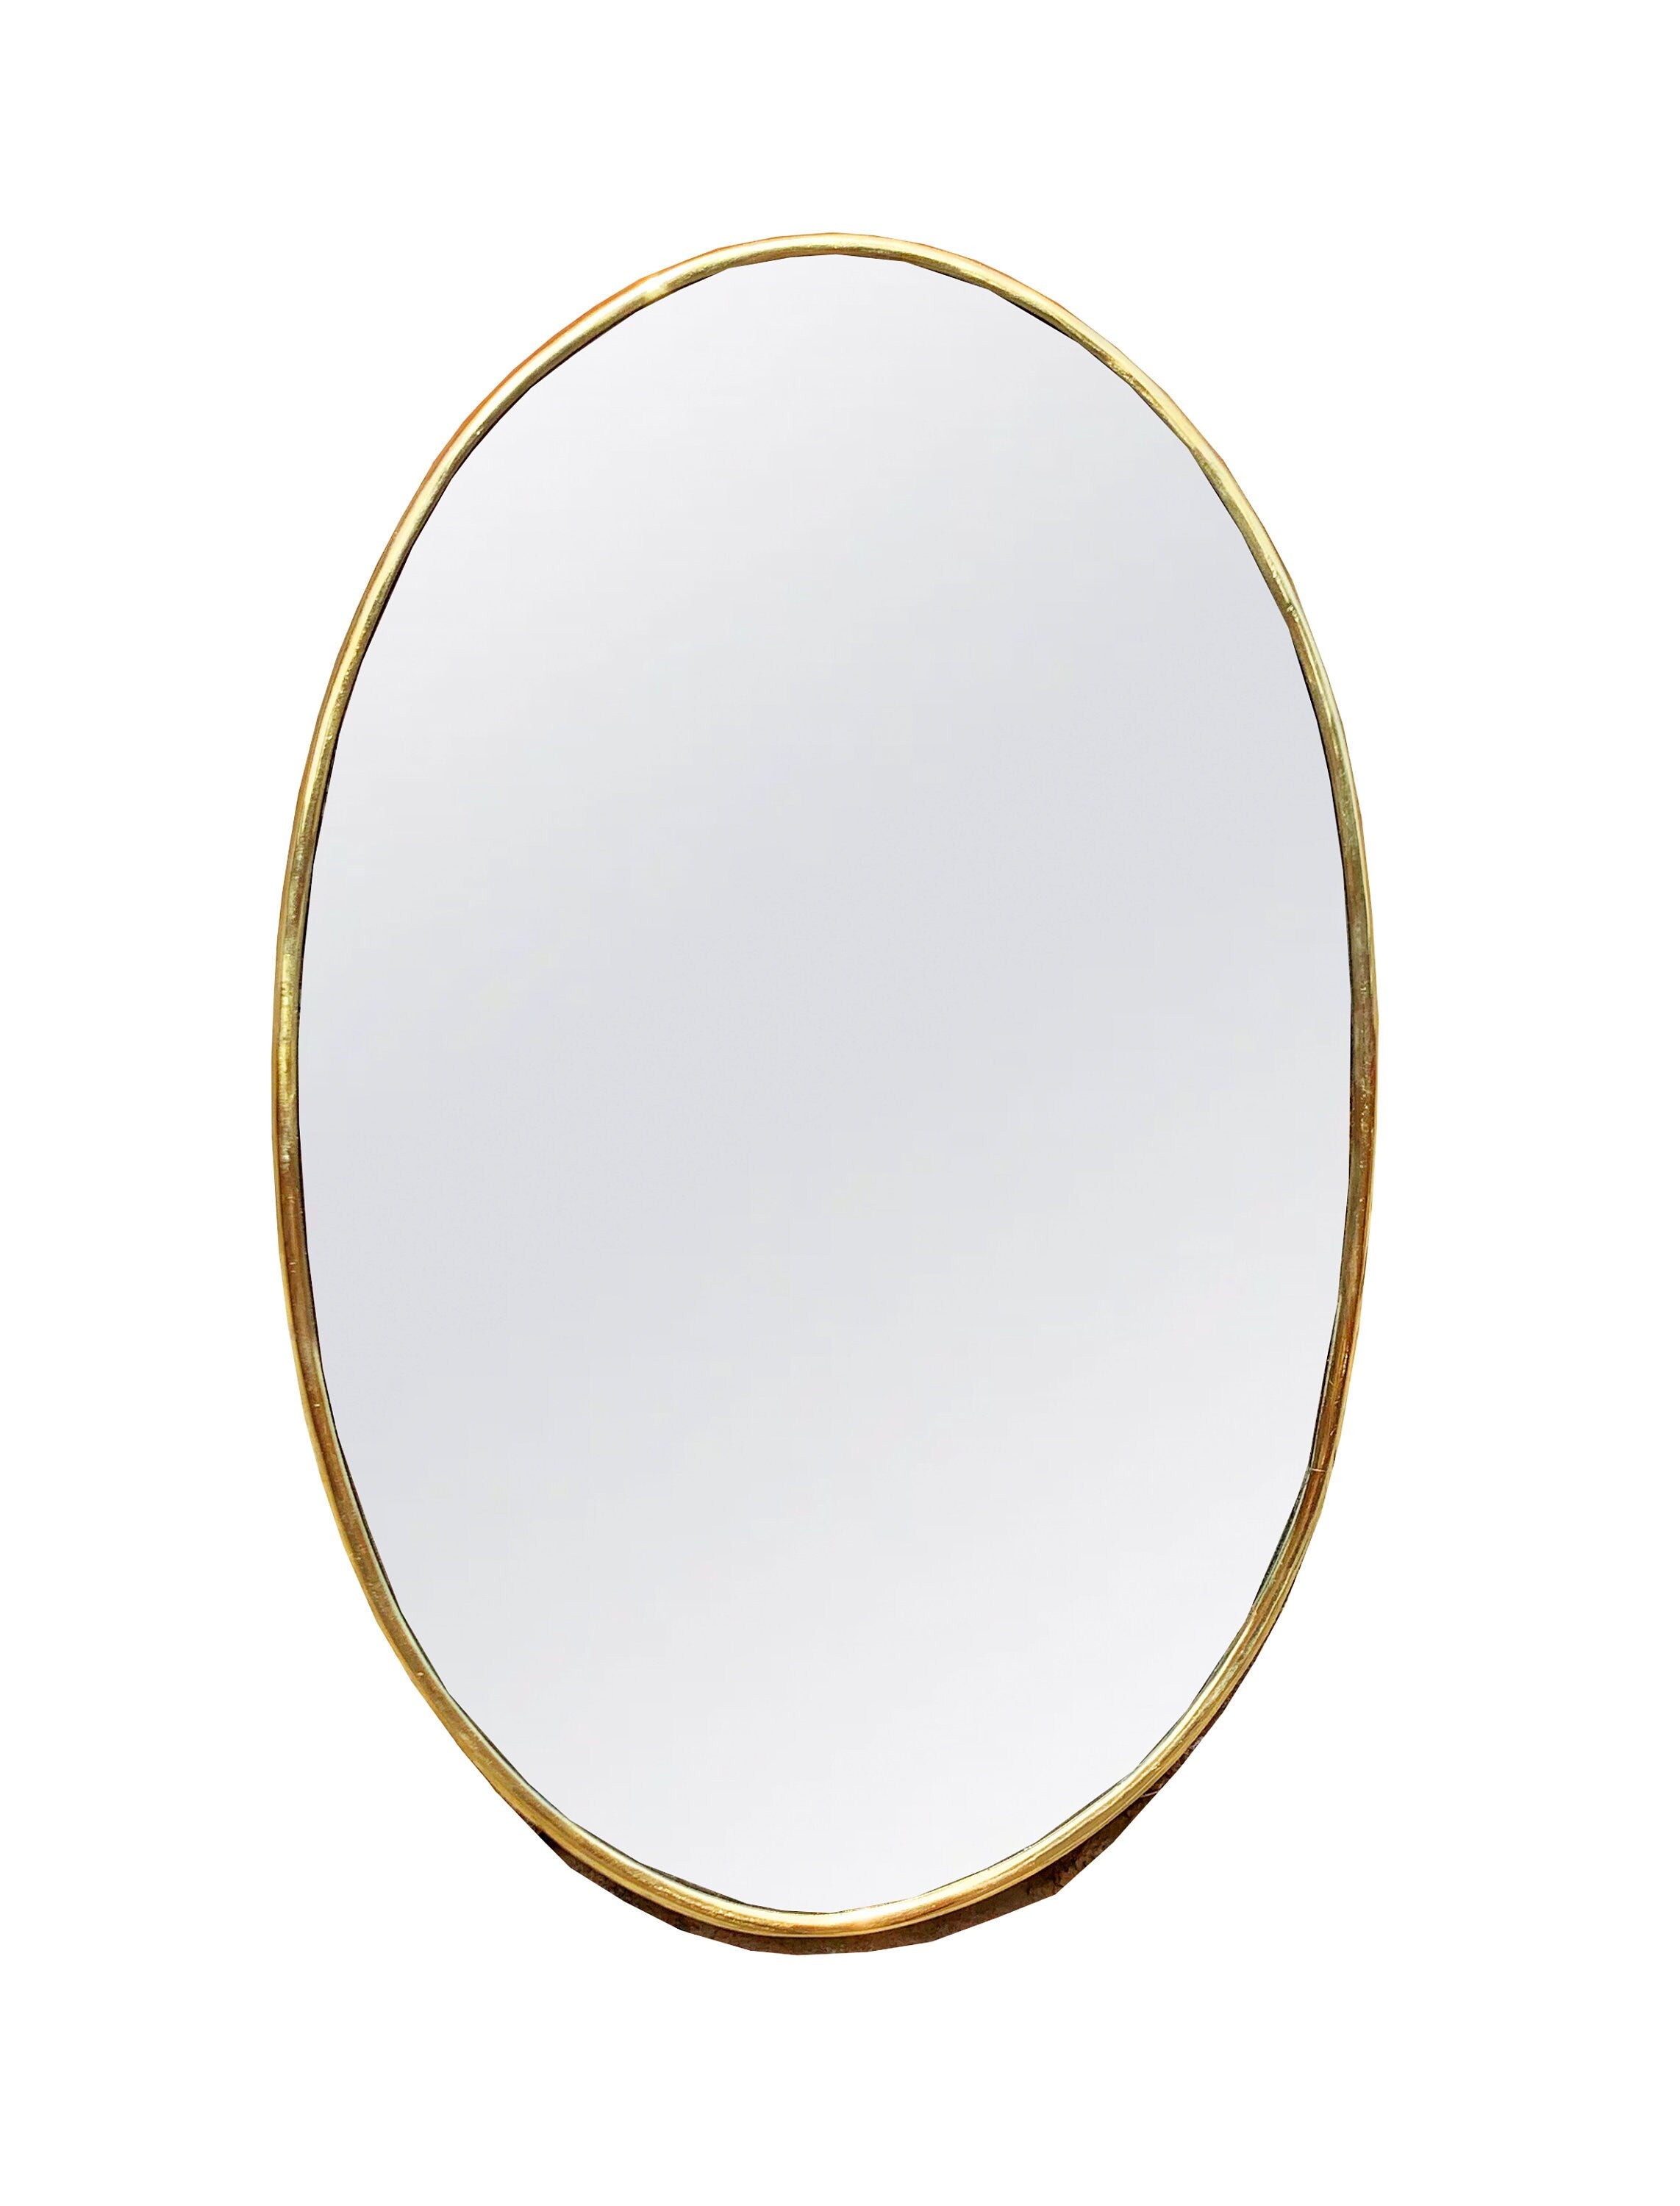 Handcrafted brass Wall Mirror